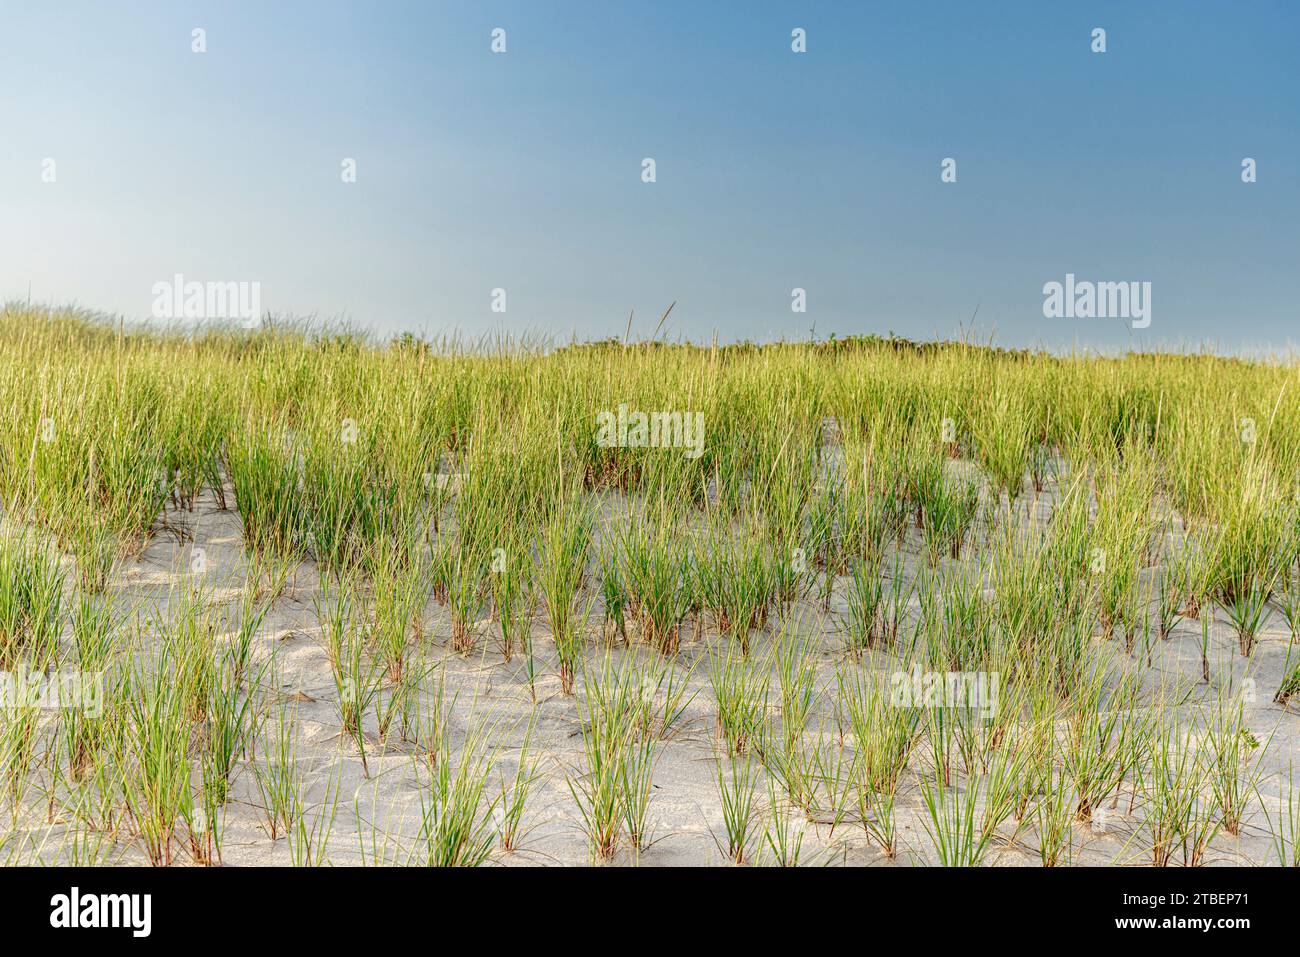 detail image of a section of a dune at the beach Stock Photo